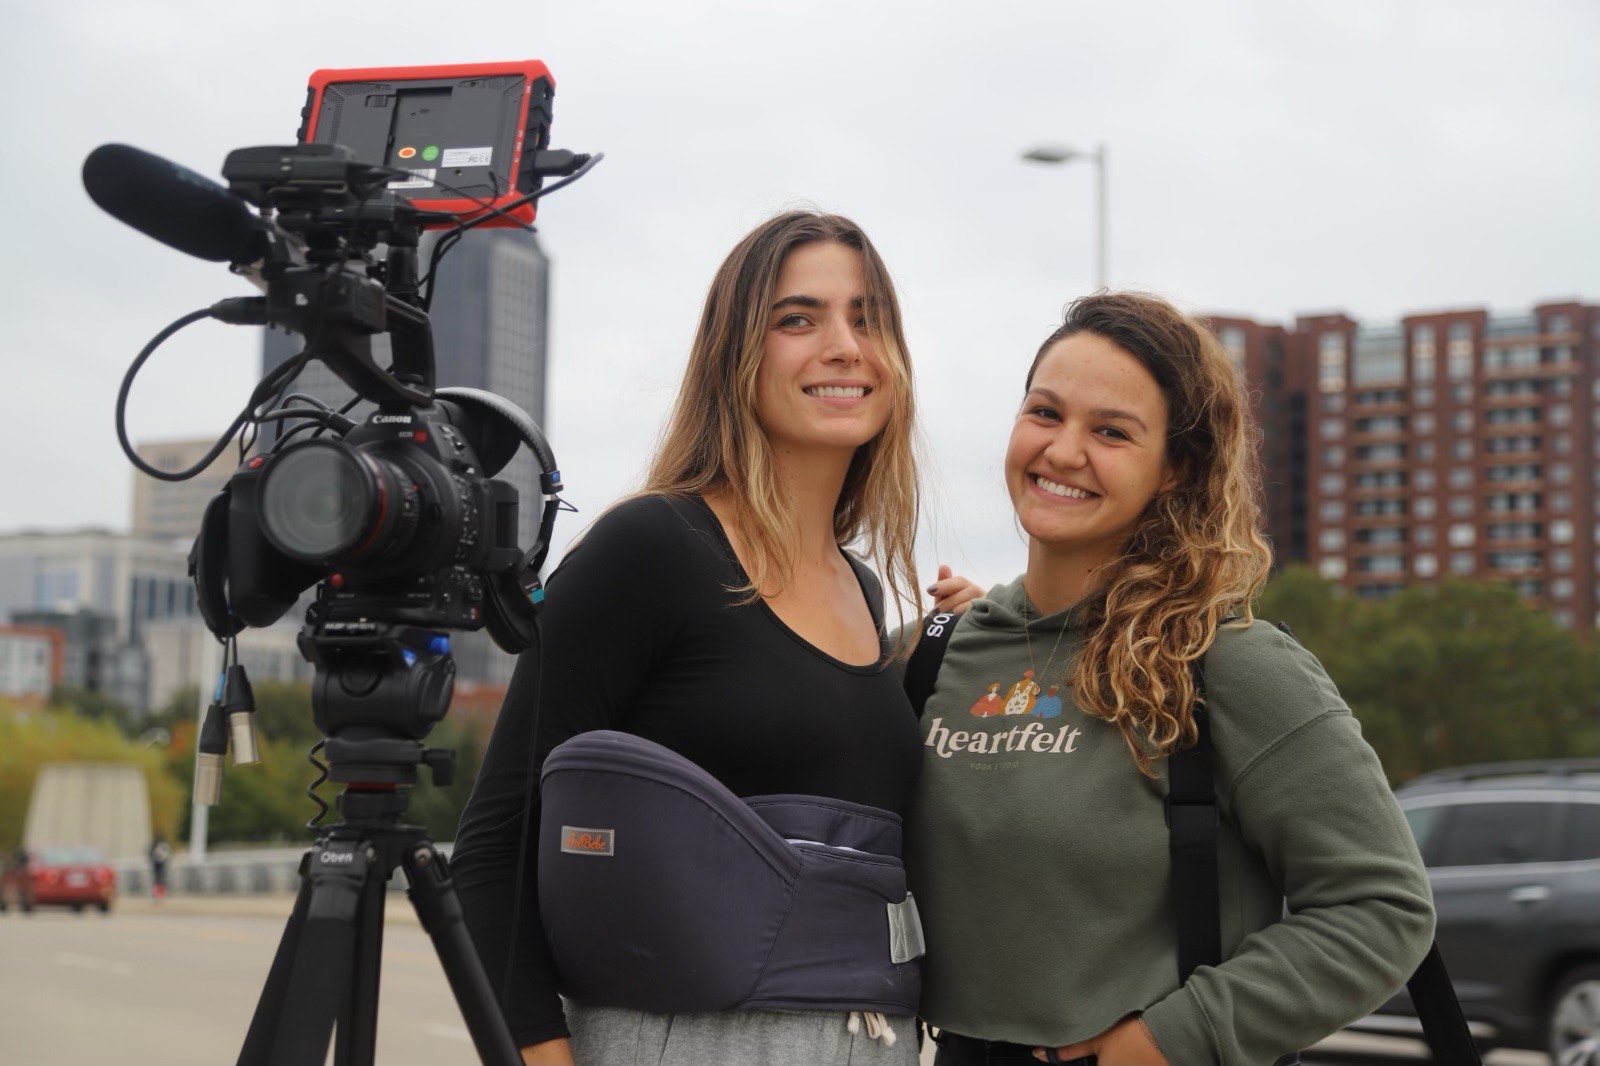 Two women pose for a picture behind a camera with city buildings in the background.